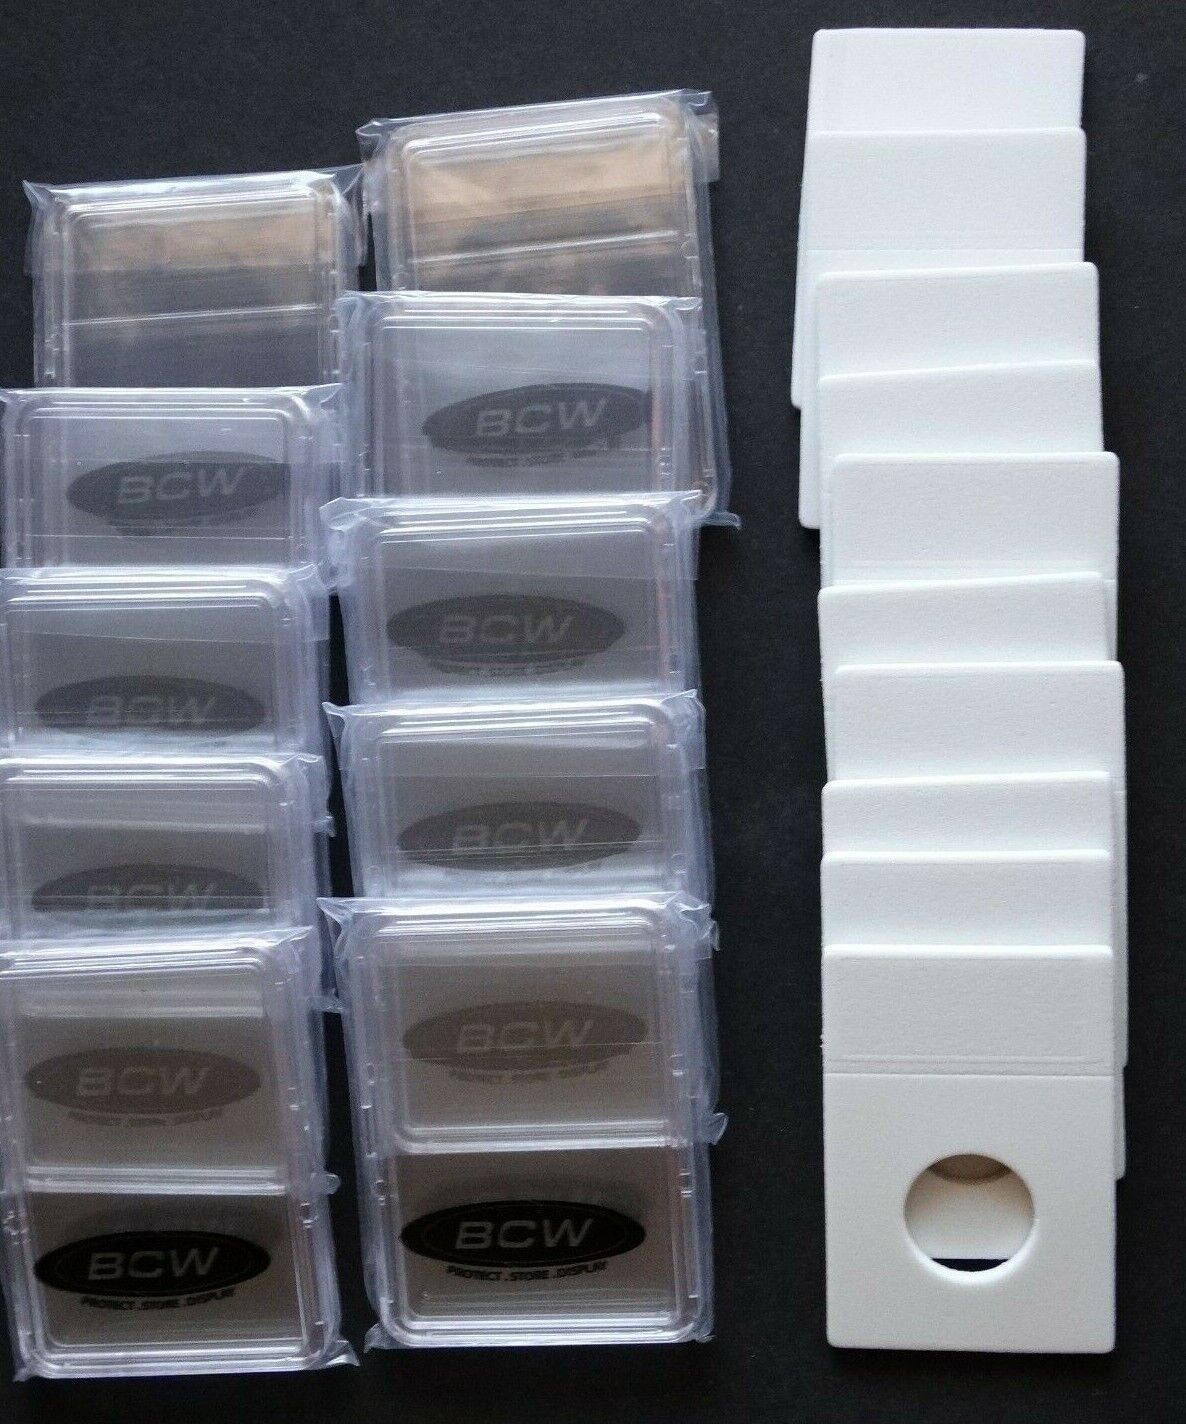 (10) BCW Nickel Coin Display Slab With Foam Insert - White - Coin - $13.95